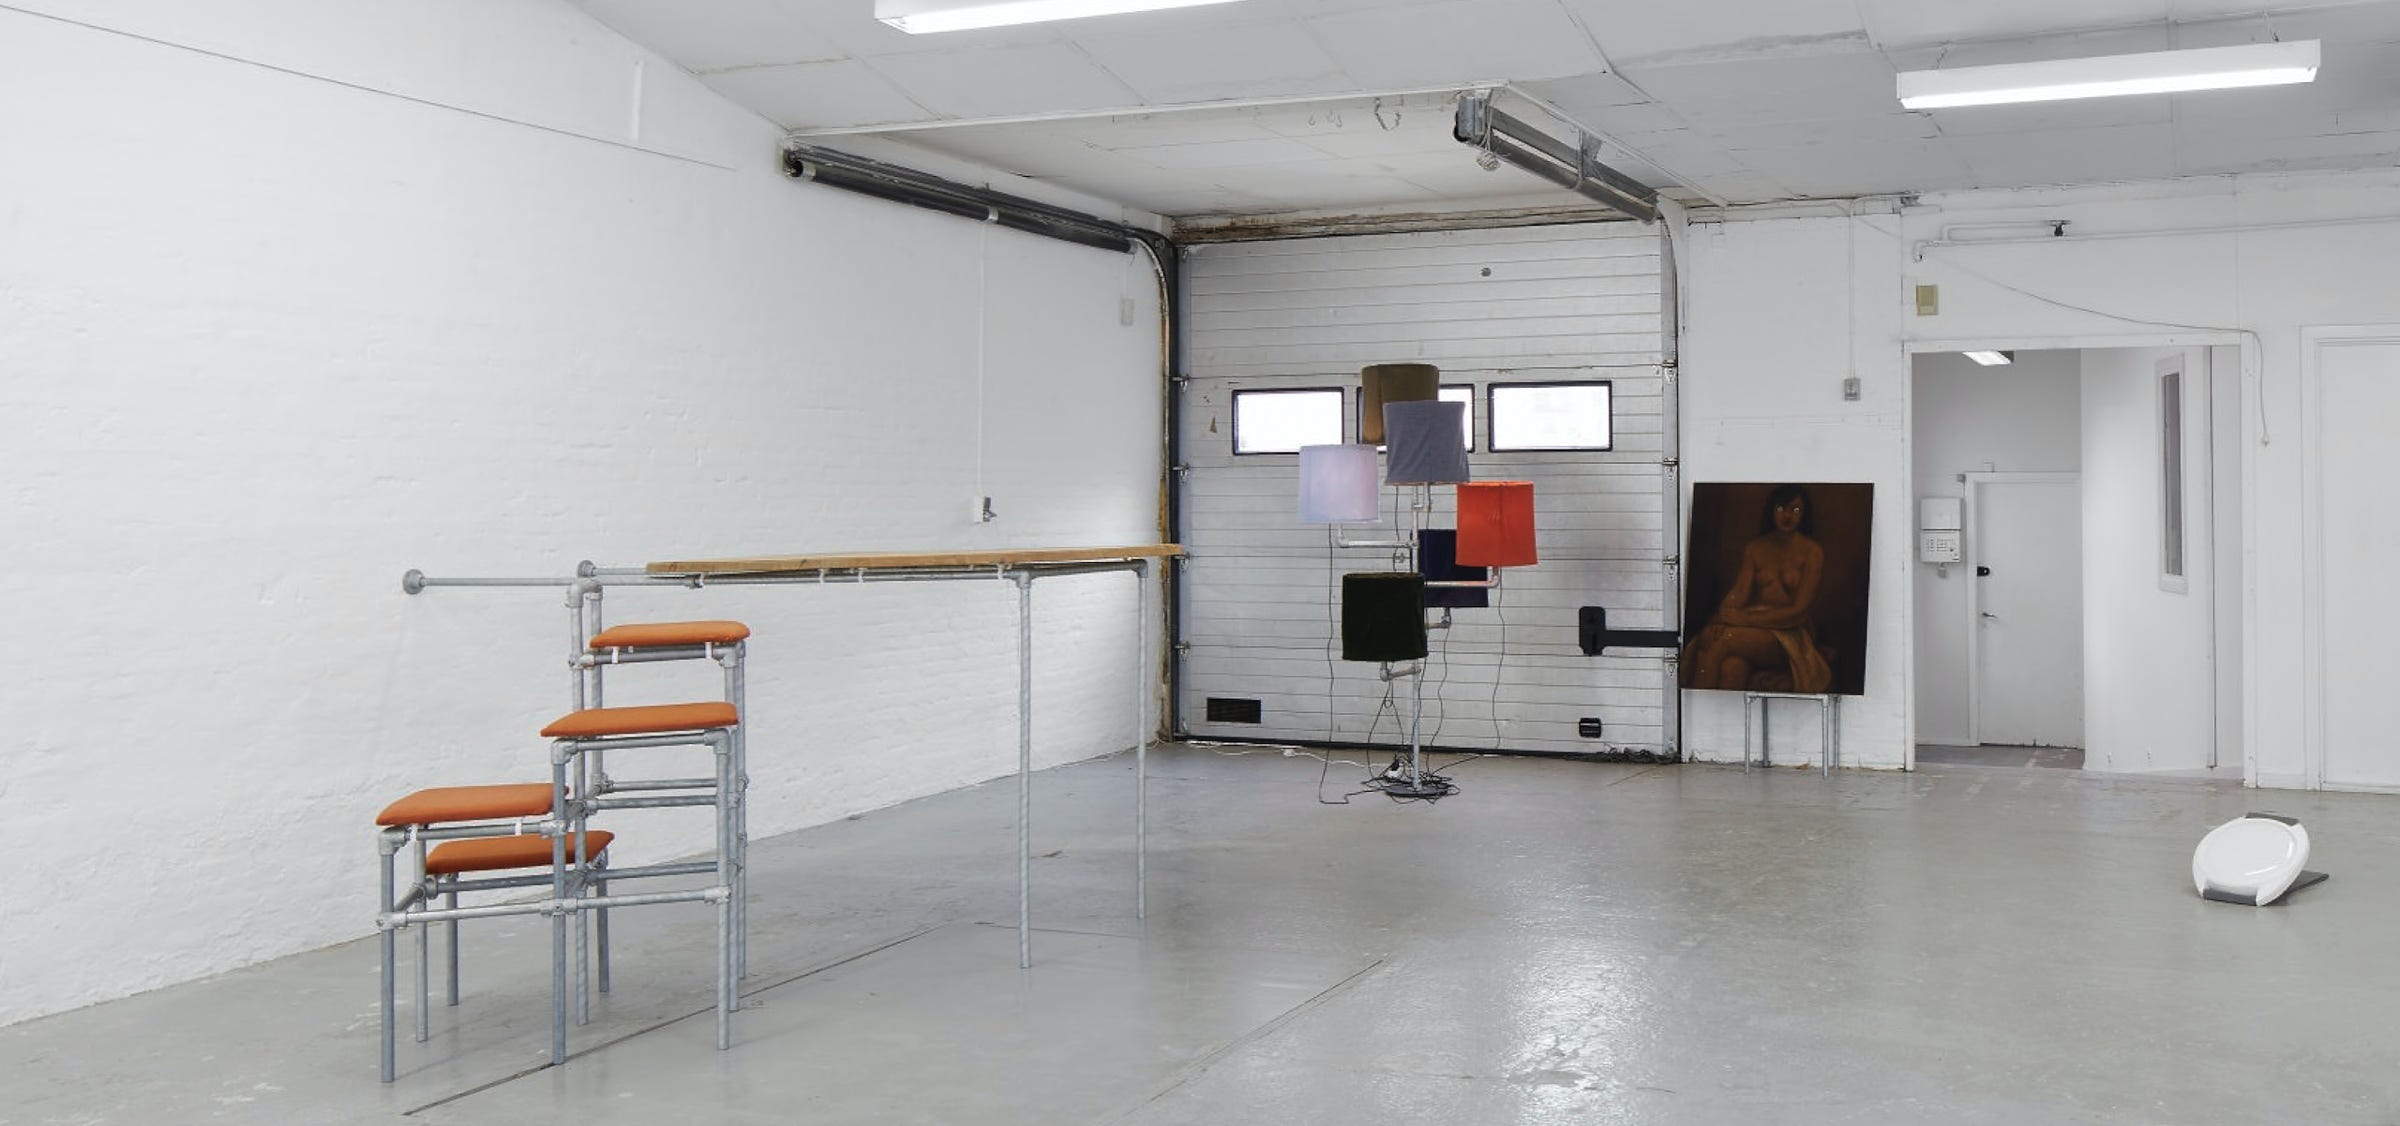 installation view, ringsted galleriet